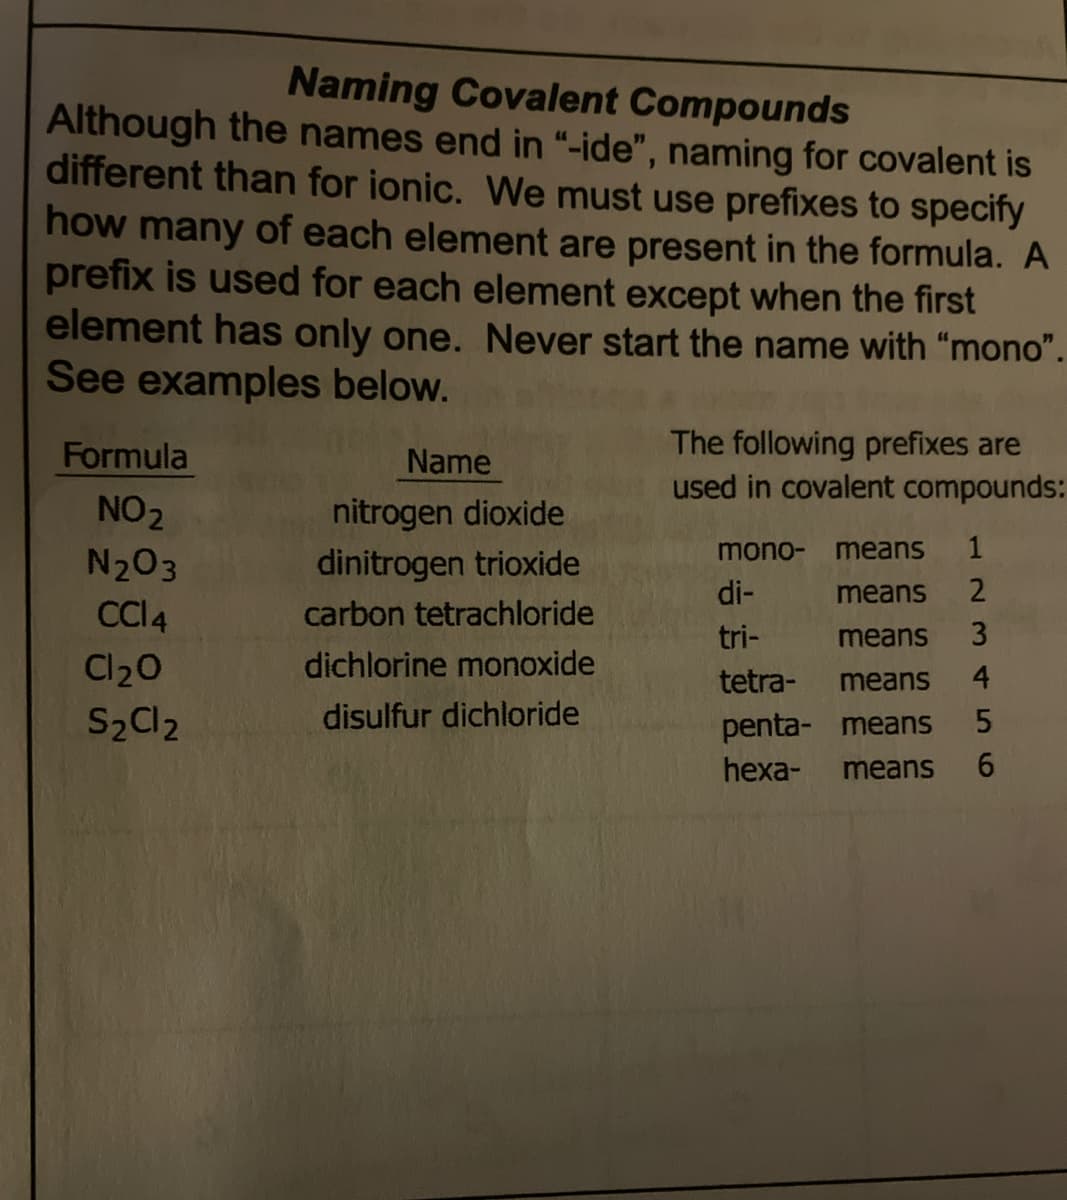 Naming Covalent Compounds
Although the names end in "-ide", naming for covalent is
different than for ionic. We must use prefixes to specify
how many of each element are present in the formula. A
prefix is used for each element except when the first
element has only one. Never start the name with "mono".
See examples below.
The following prefixes are
used in covalent compounds:
Formula
Name
nitrogen dioxide
dinitrogen trioxide
NO2
mono-
means
1
N203
di-
means
carbon tetrachloride
tri-
means
3
dichlorine monoxide
Cl20
S2C12
tetra-
means
4
disulfur dichloride
penta- means
hexa-
5
means
